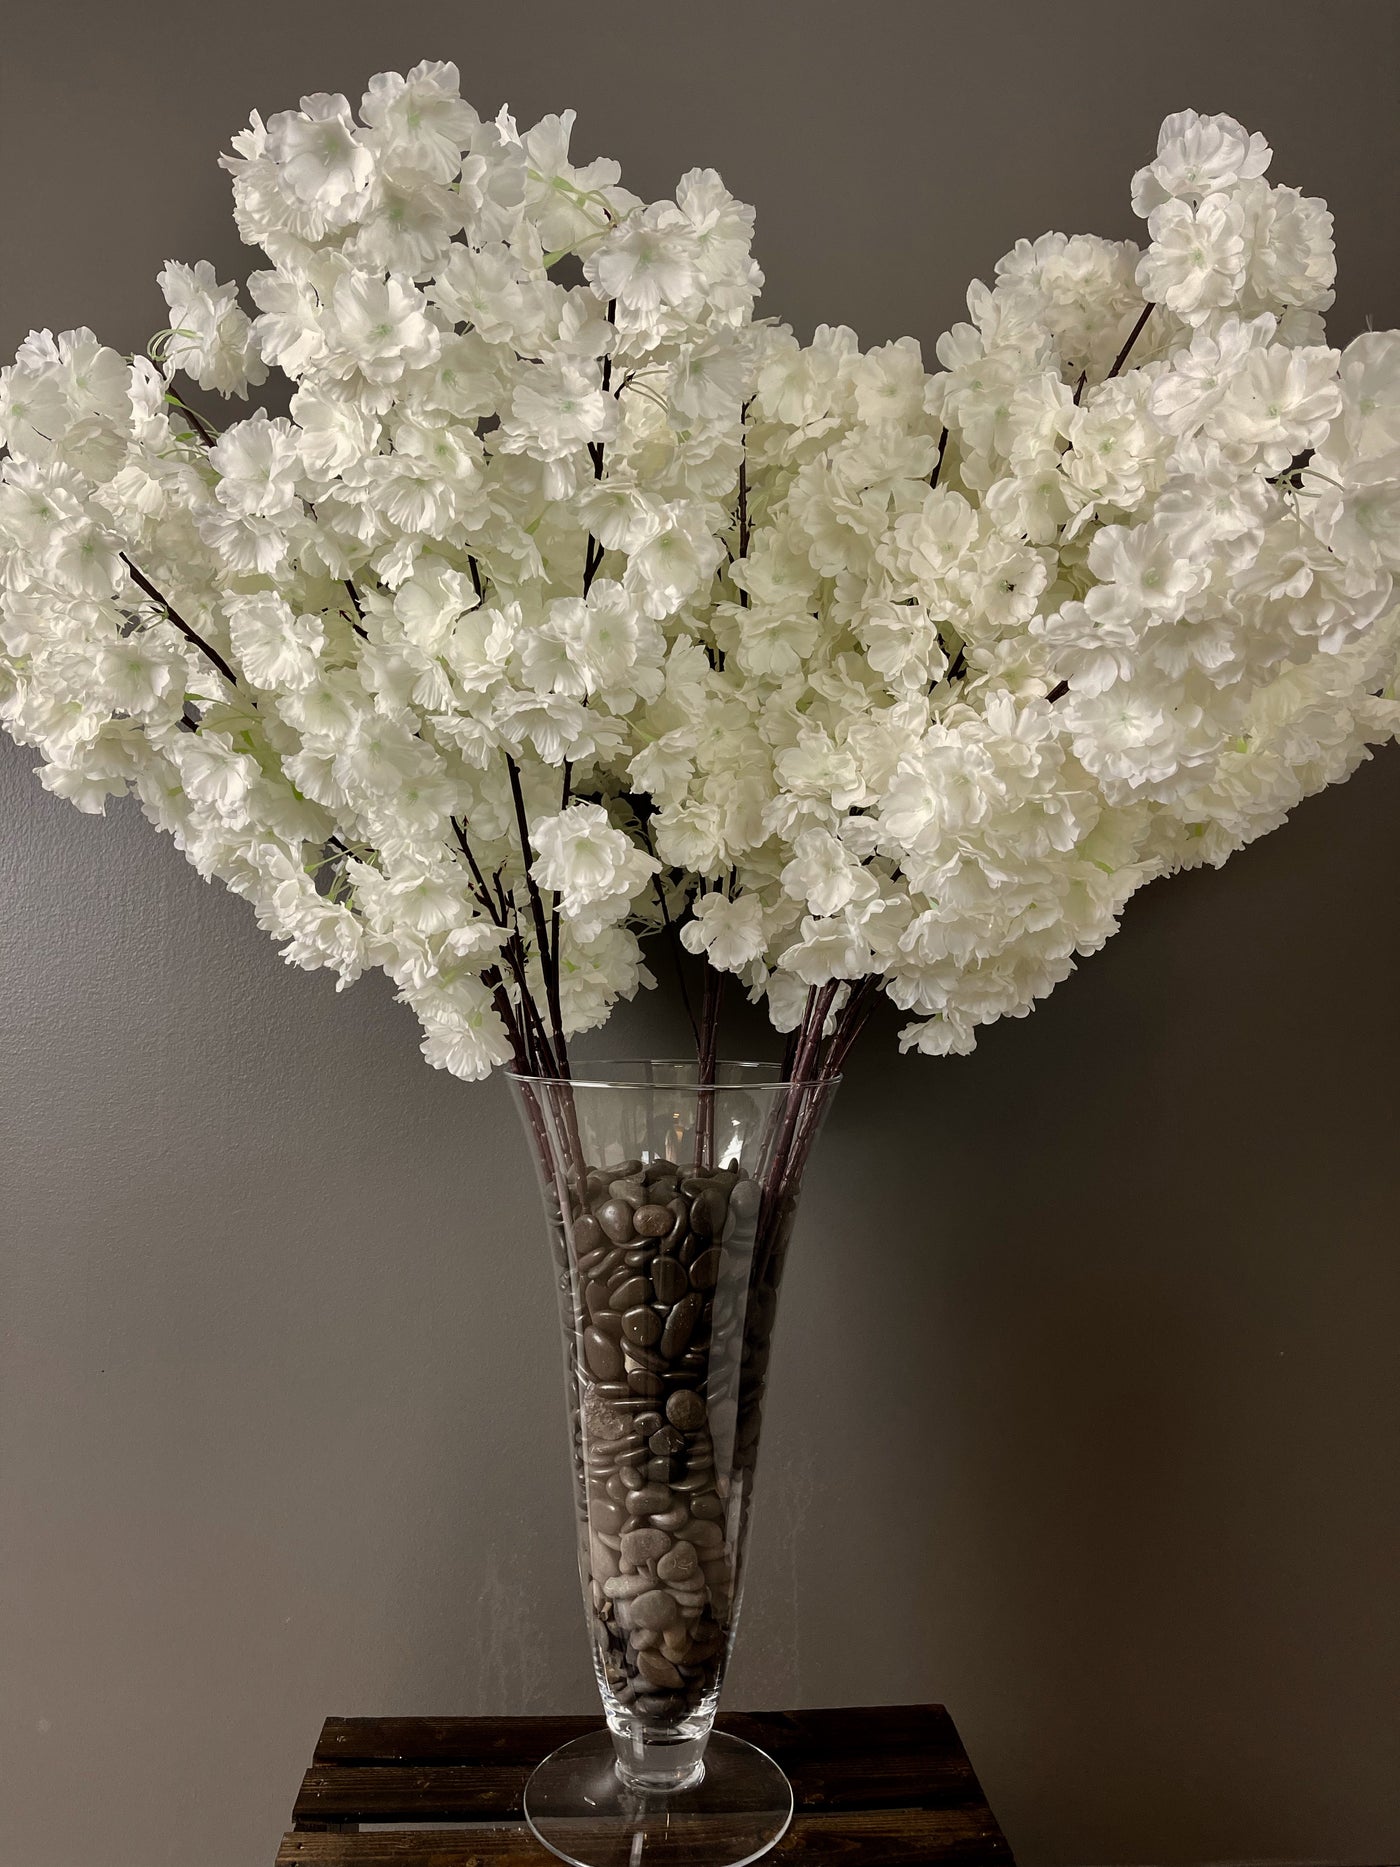 Rent a Rose- Decor- This statement arrangement brings wonderful height and fullness to your event. The vase is 17" tall and the arrangement is 36" tall.